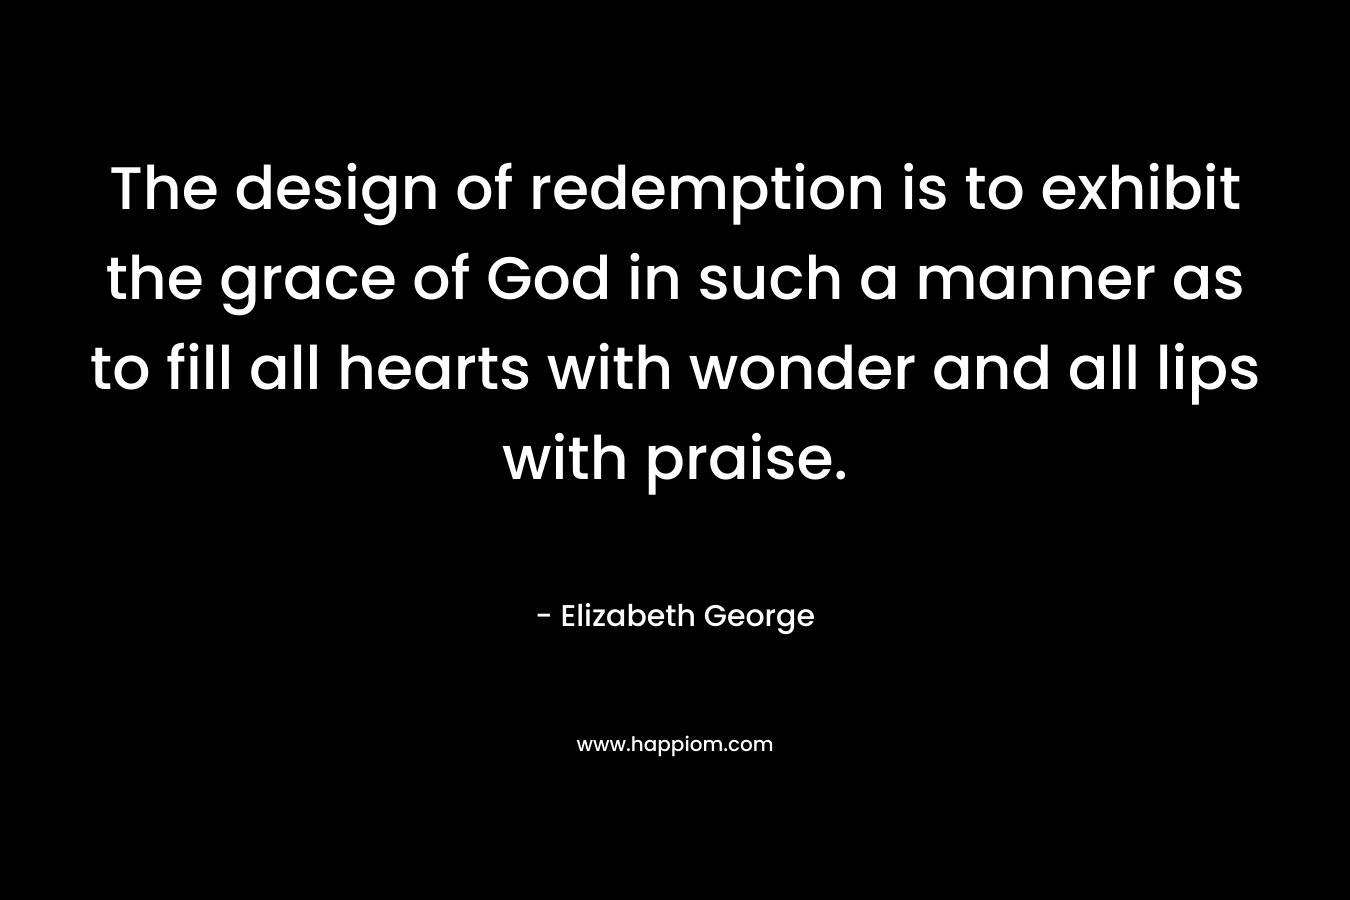 The design of redemption is to exhibit the grace of God in such a manner as to fill all hearts with wonder and all lips with praise. – Elizabeth George